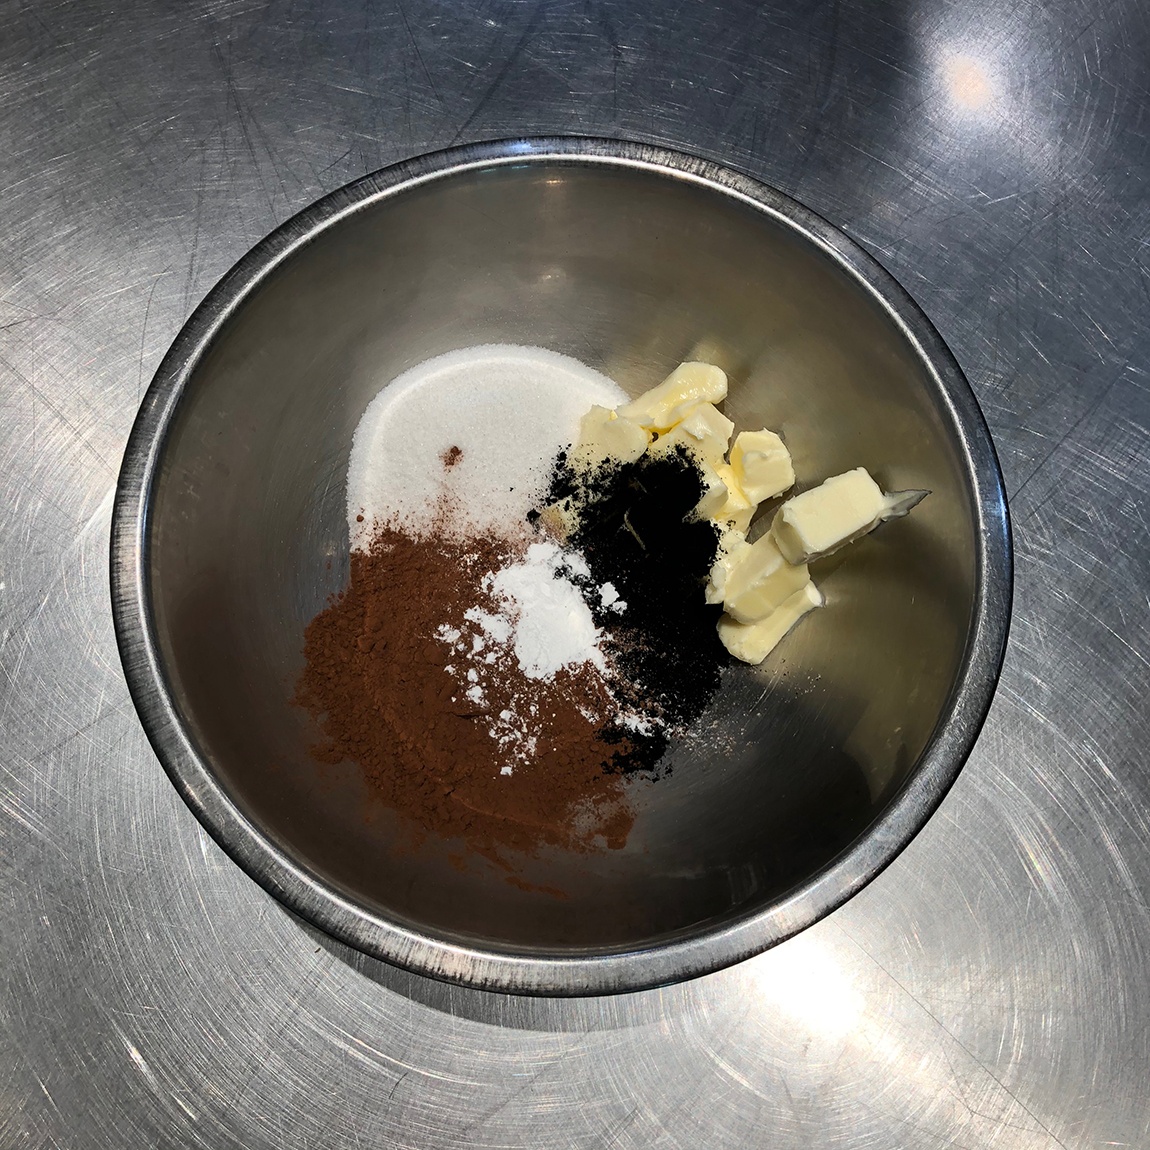 A view of unmixed ingredients in a metal mixing bowl.